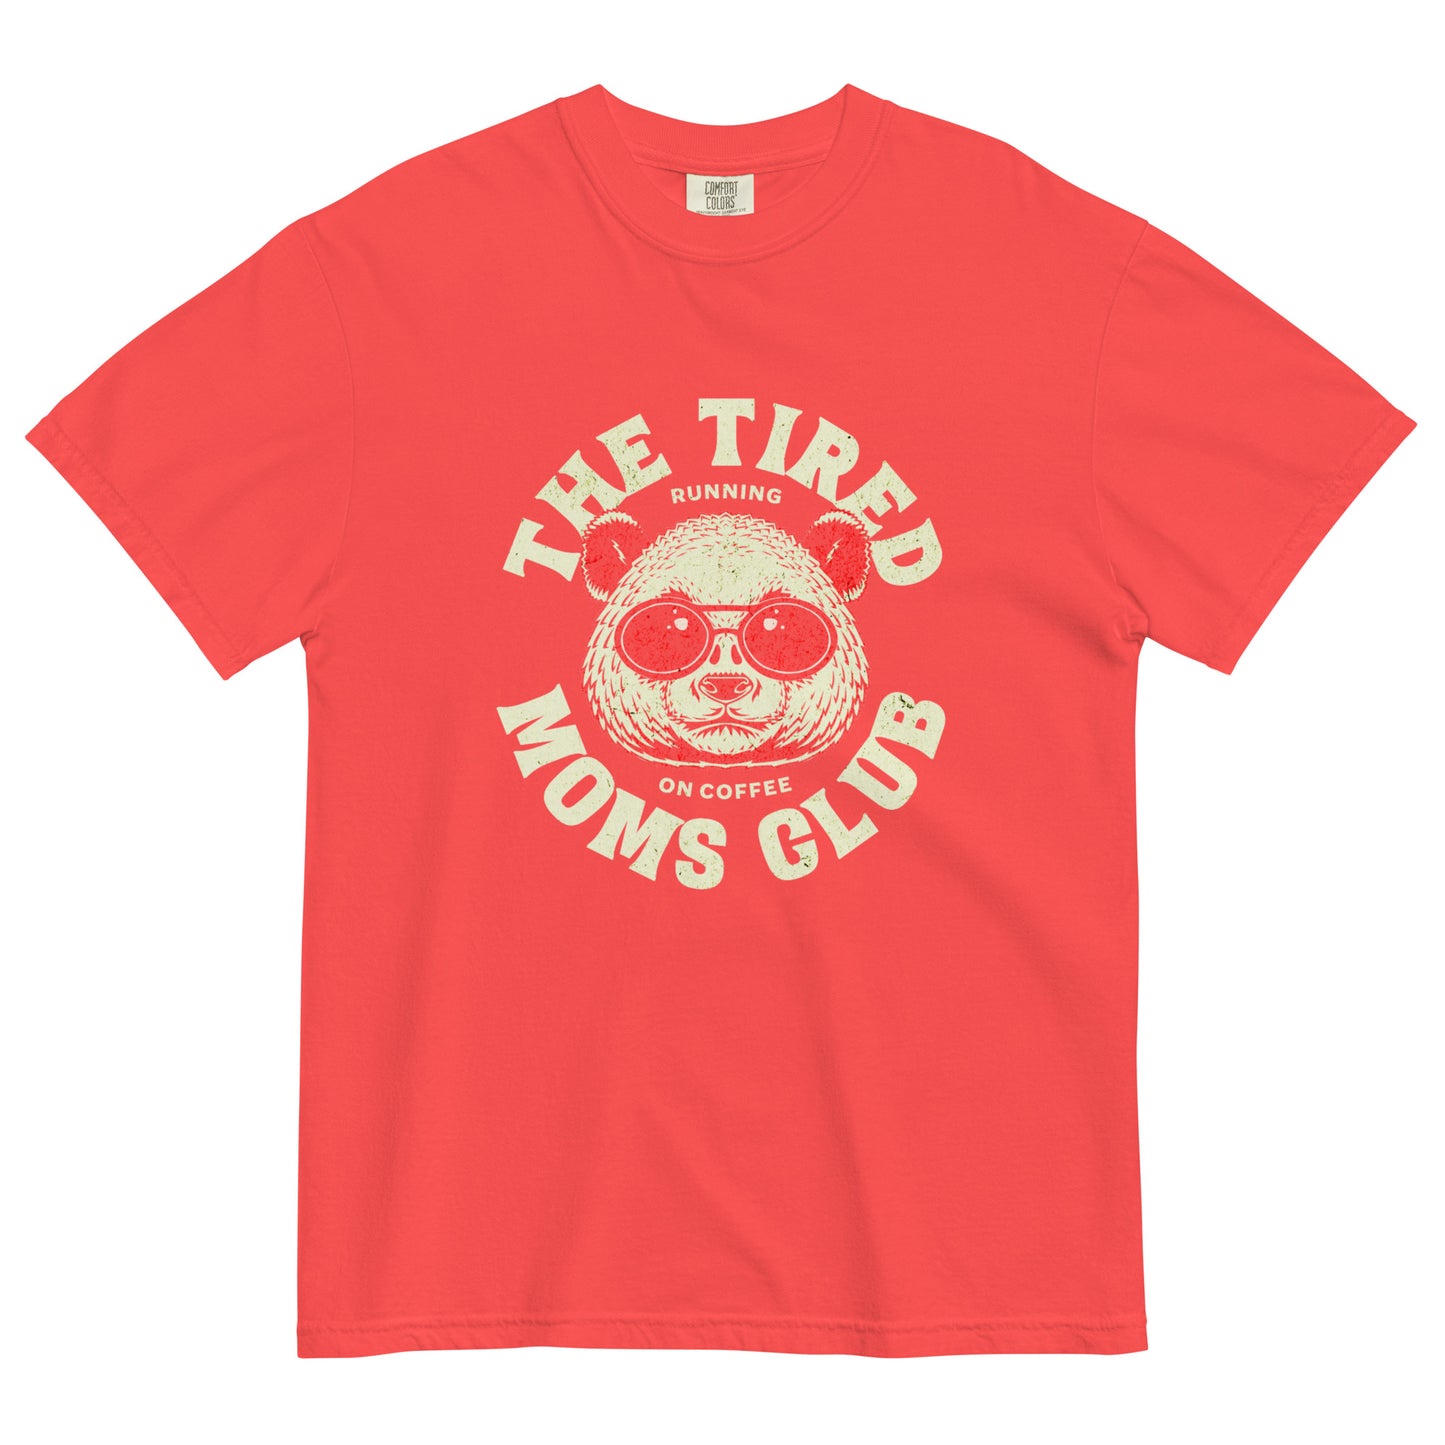 Women's The Tired Moms Club Vintage Graphic Tee